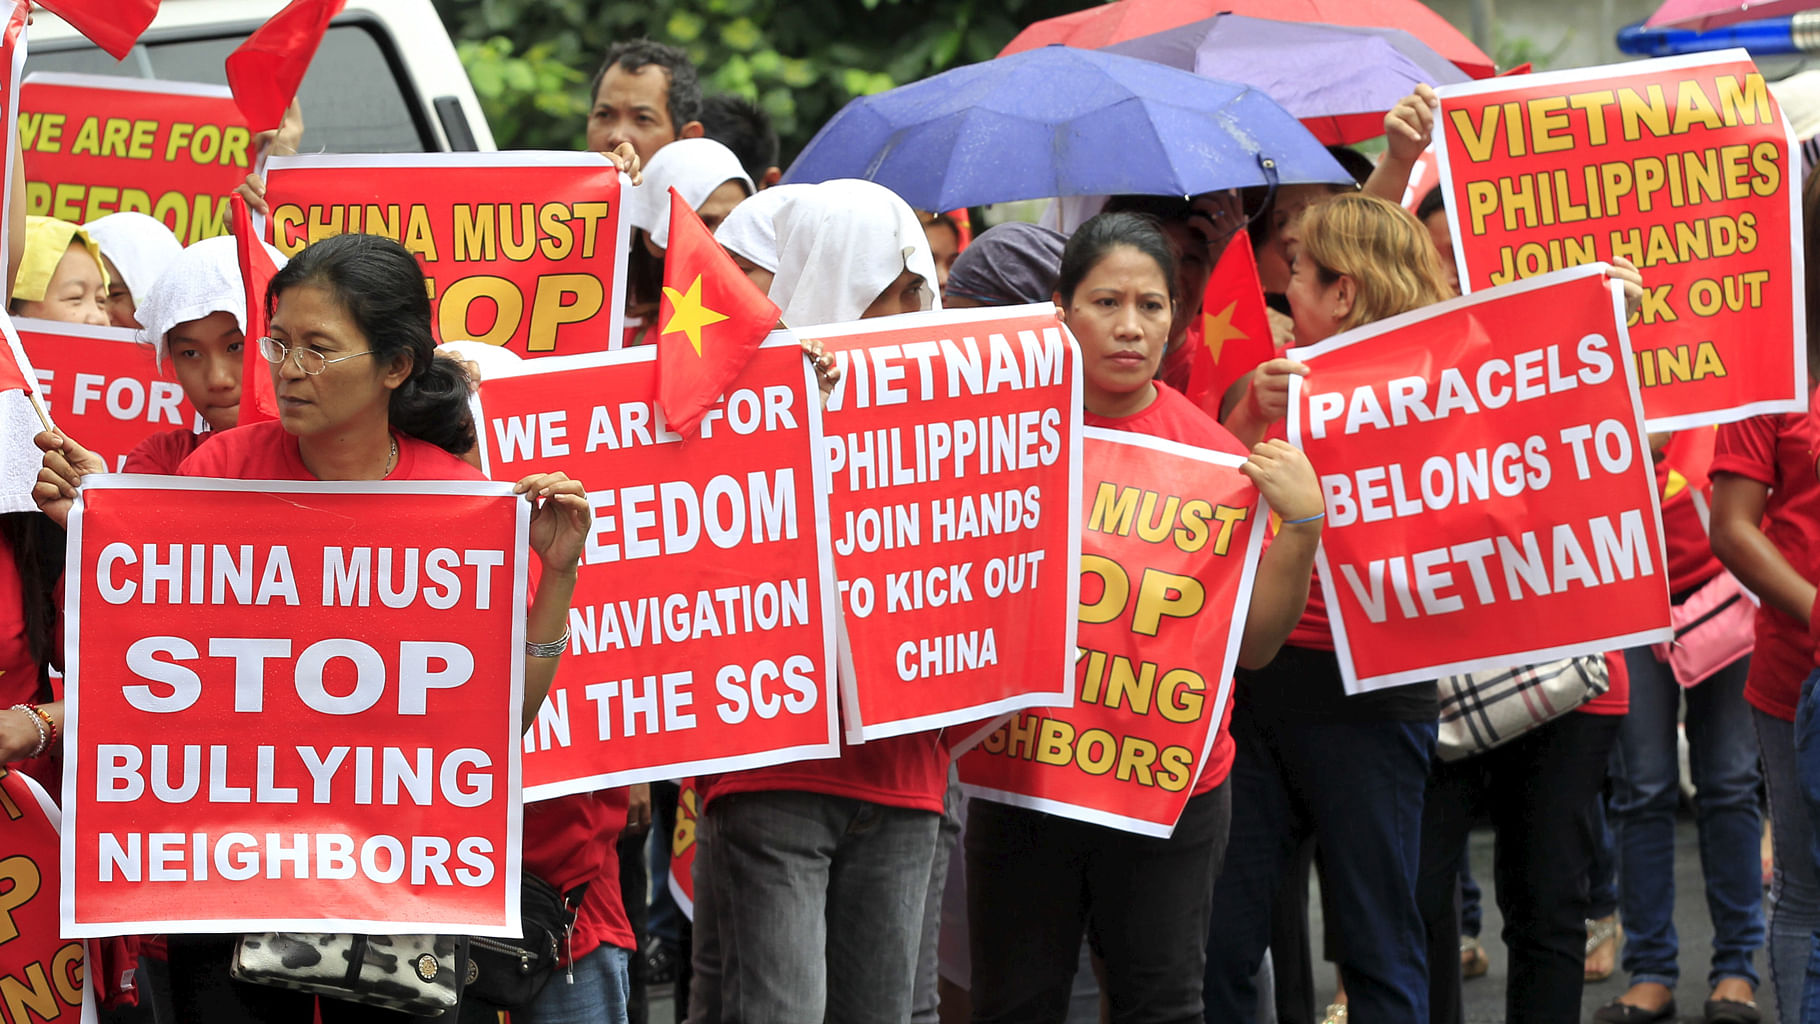 Protesters hold placards as they join in a protest rally to denounce China’s military buildup in the South China Sea,  metro Manila on 25 February, 2016. (Photo: Reuters)